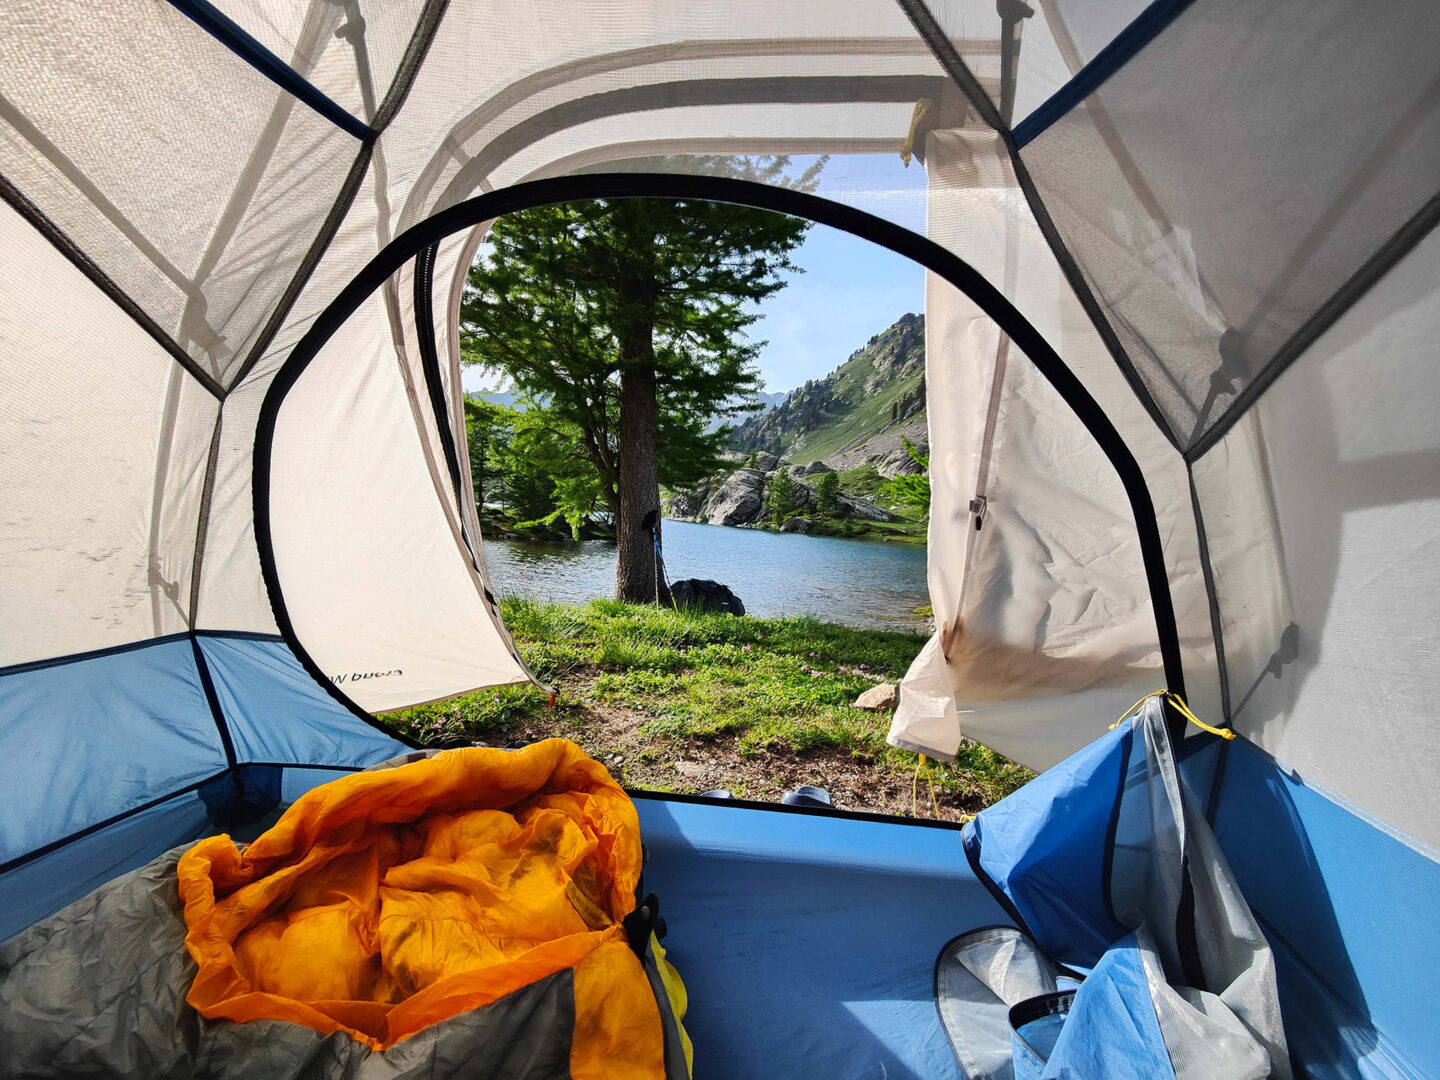 View of nature from inside a tent, camping outdoor